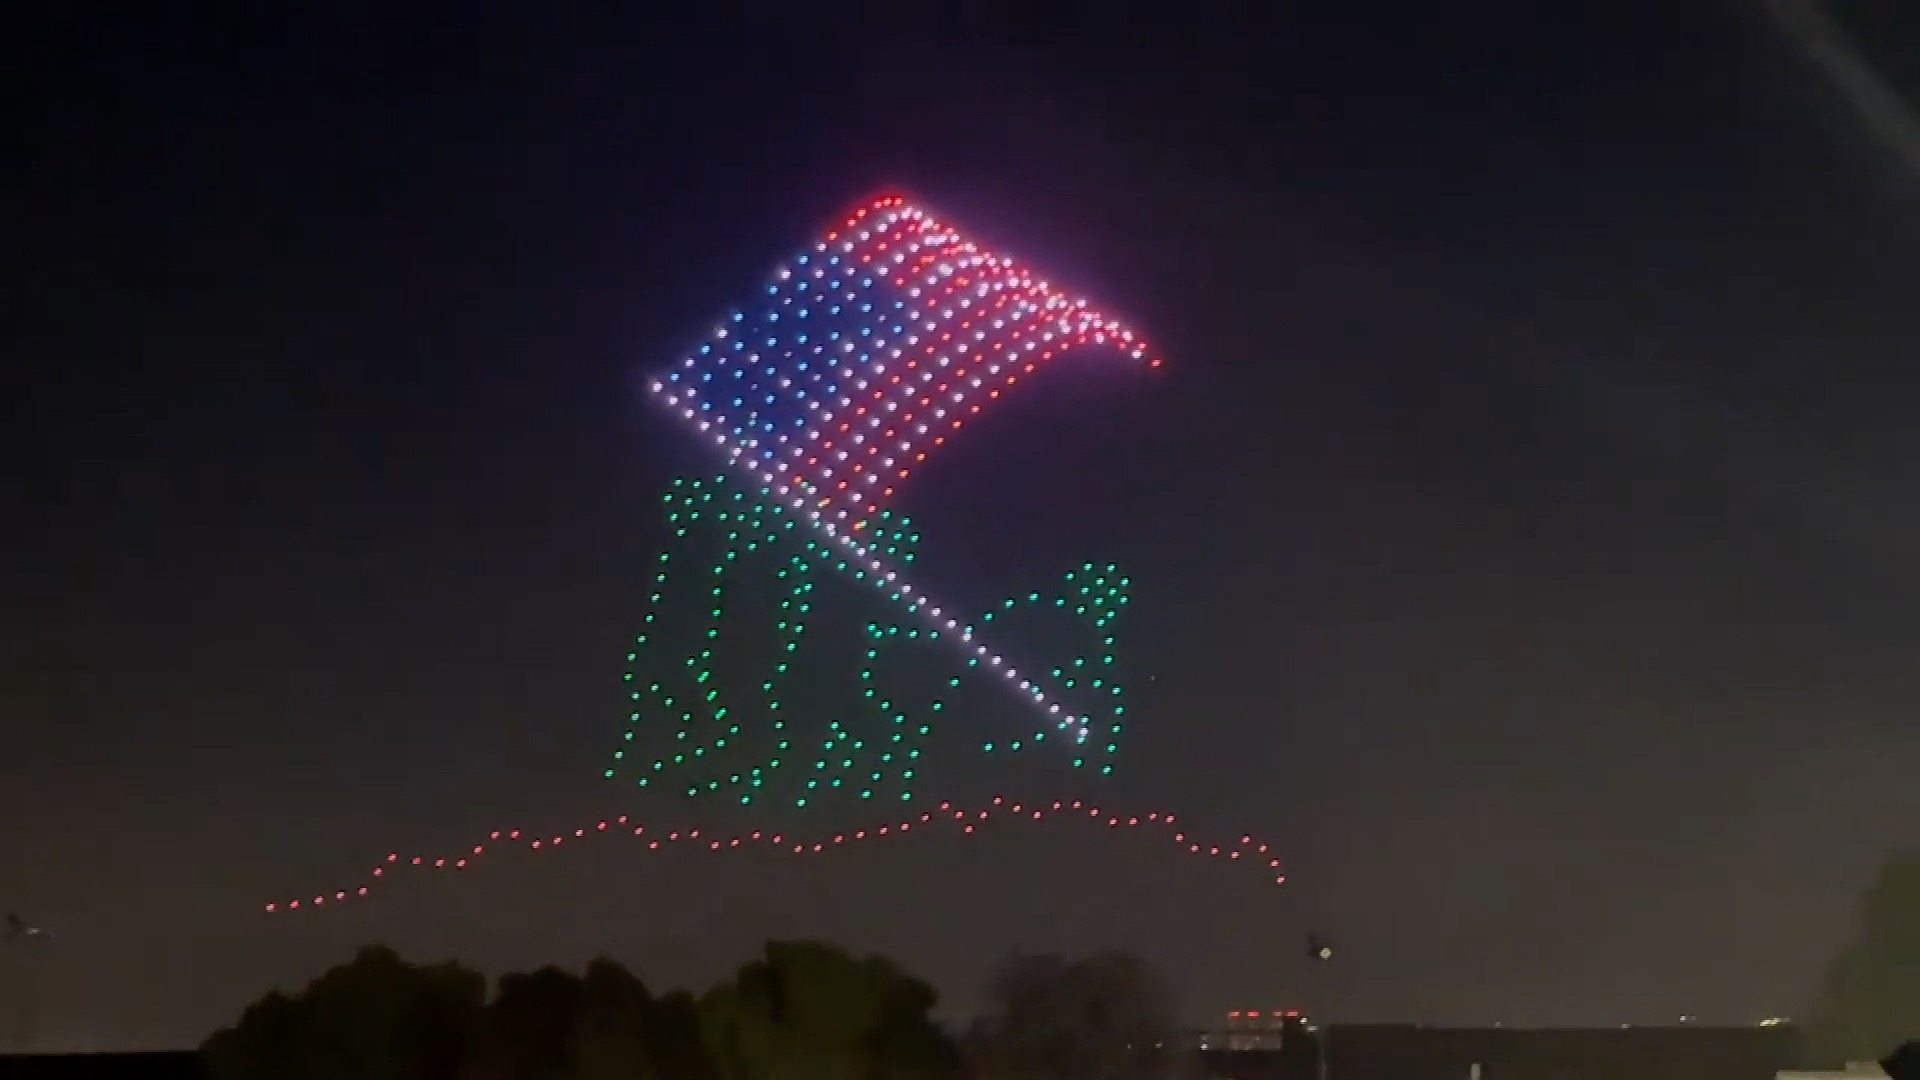 Drone show displays light up the sky on Fourth of July - BBC News